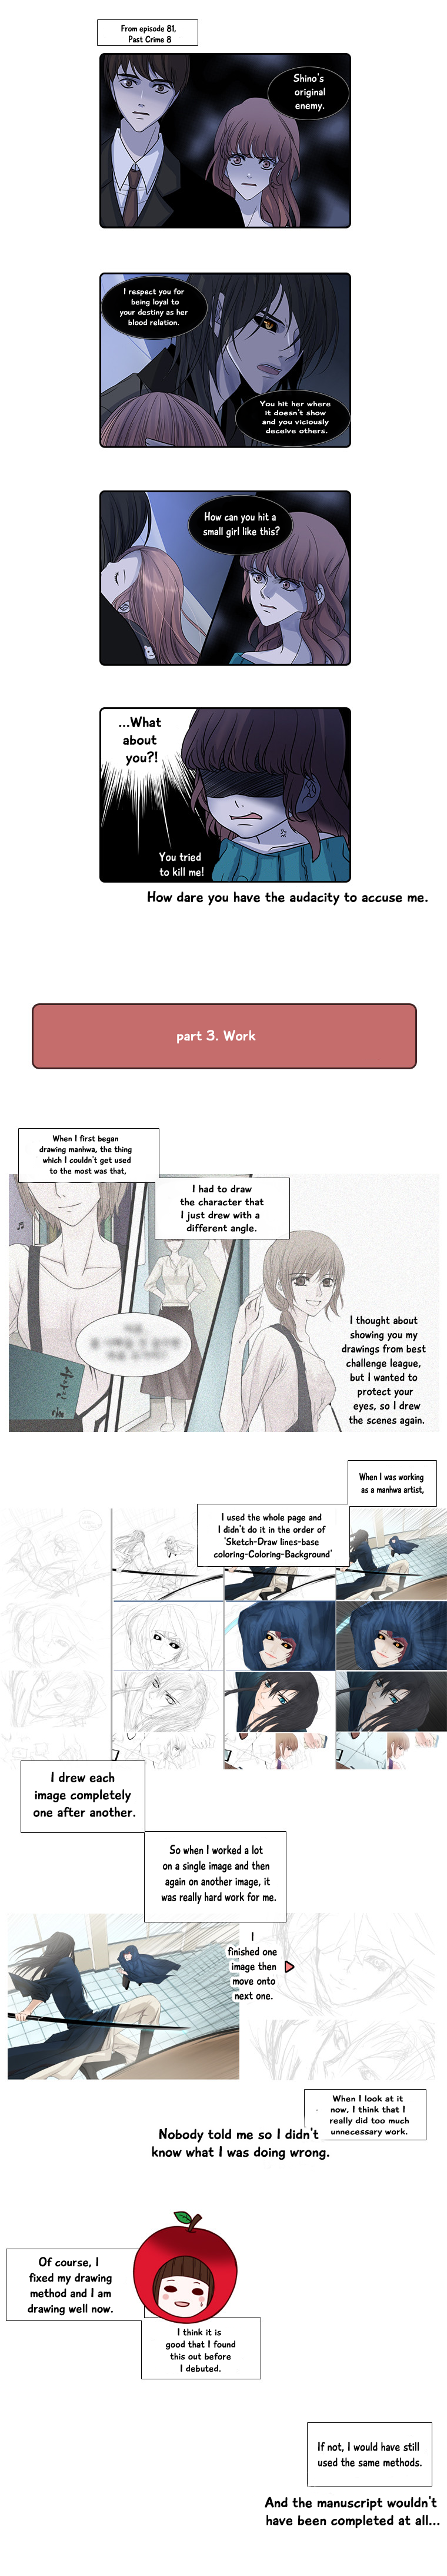 Heavenly Match - 88.2 page 4